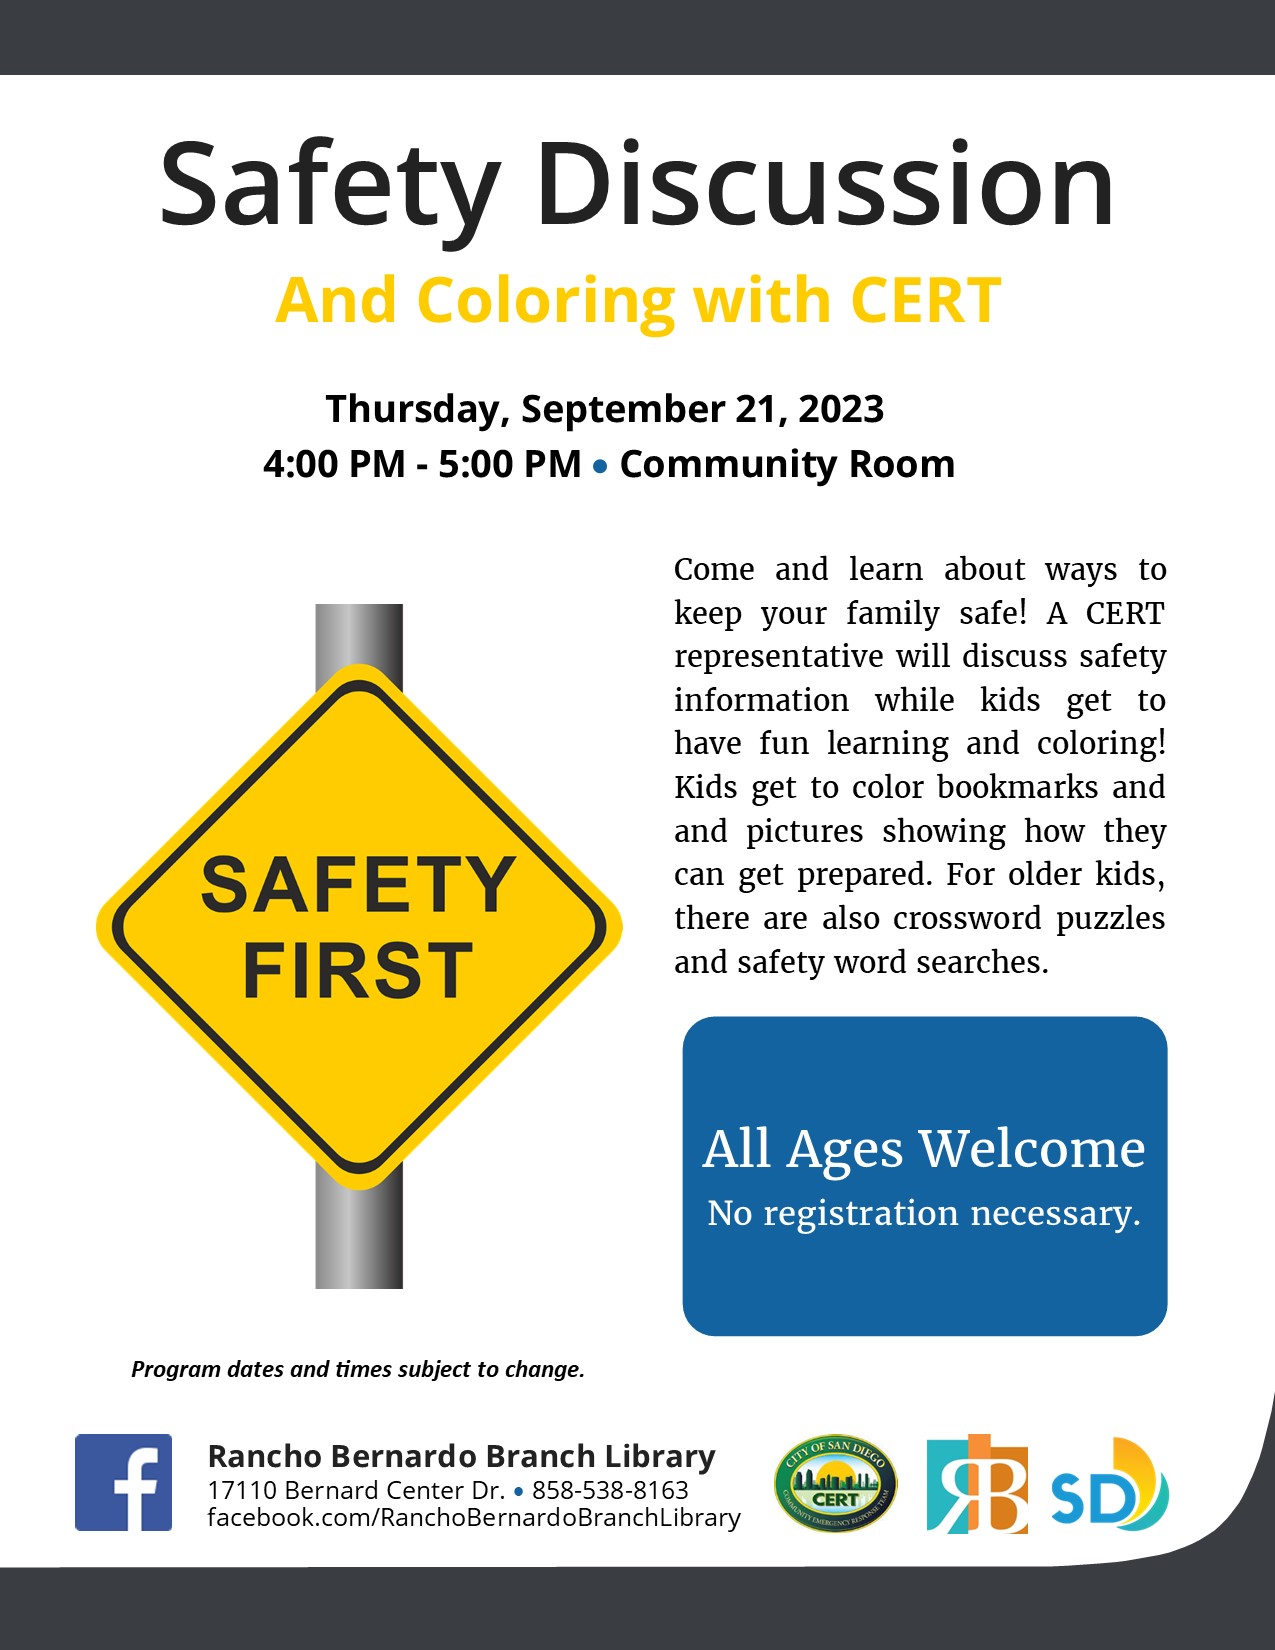 Safety Discussion